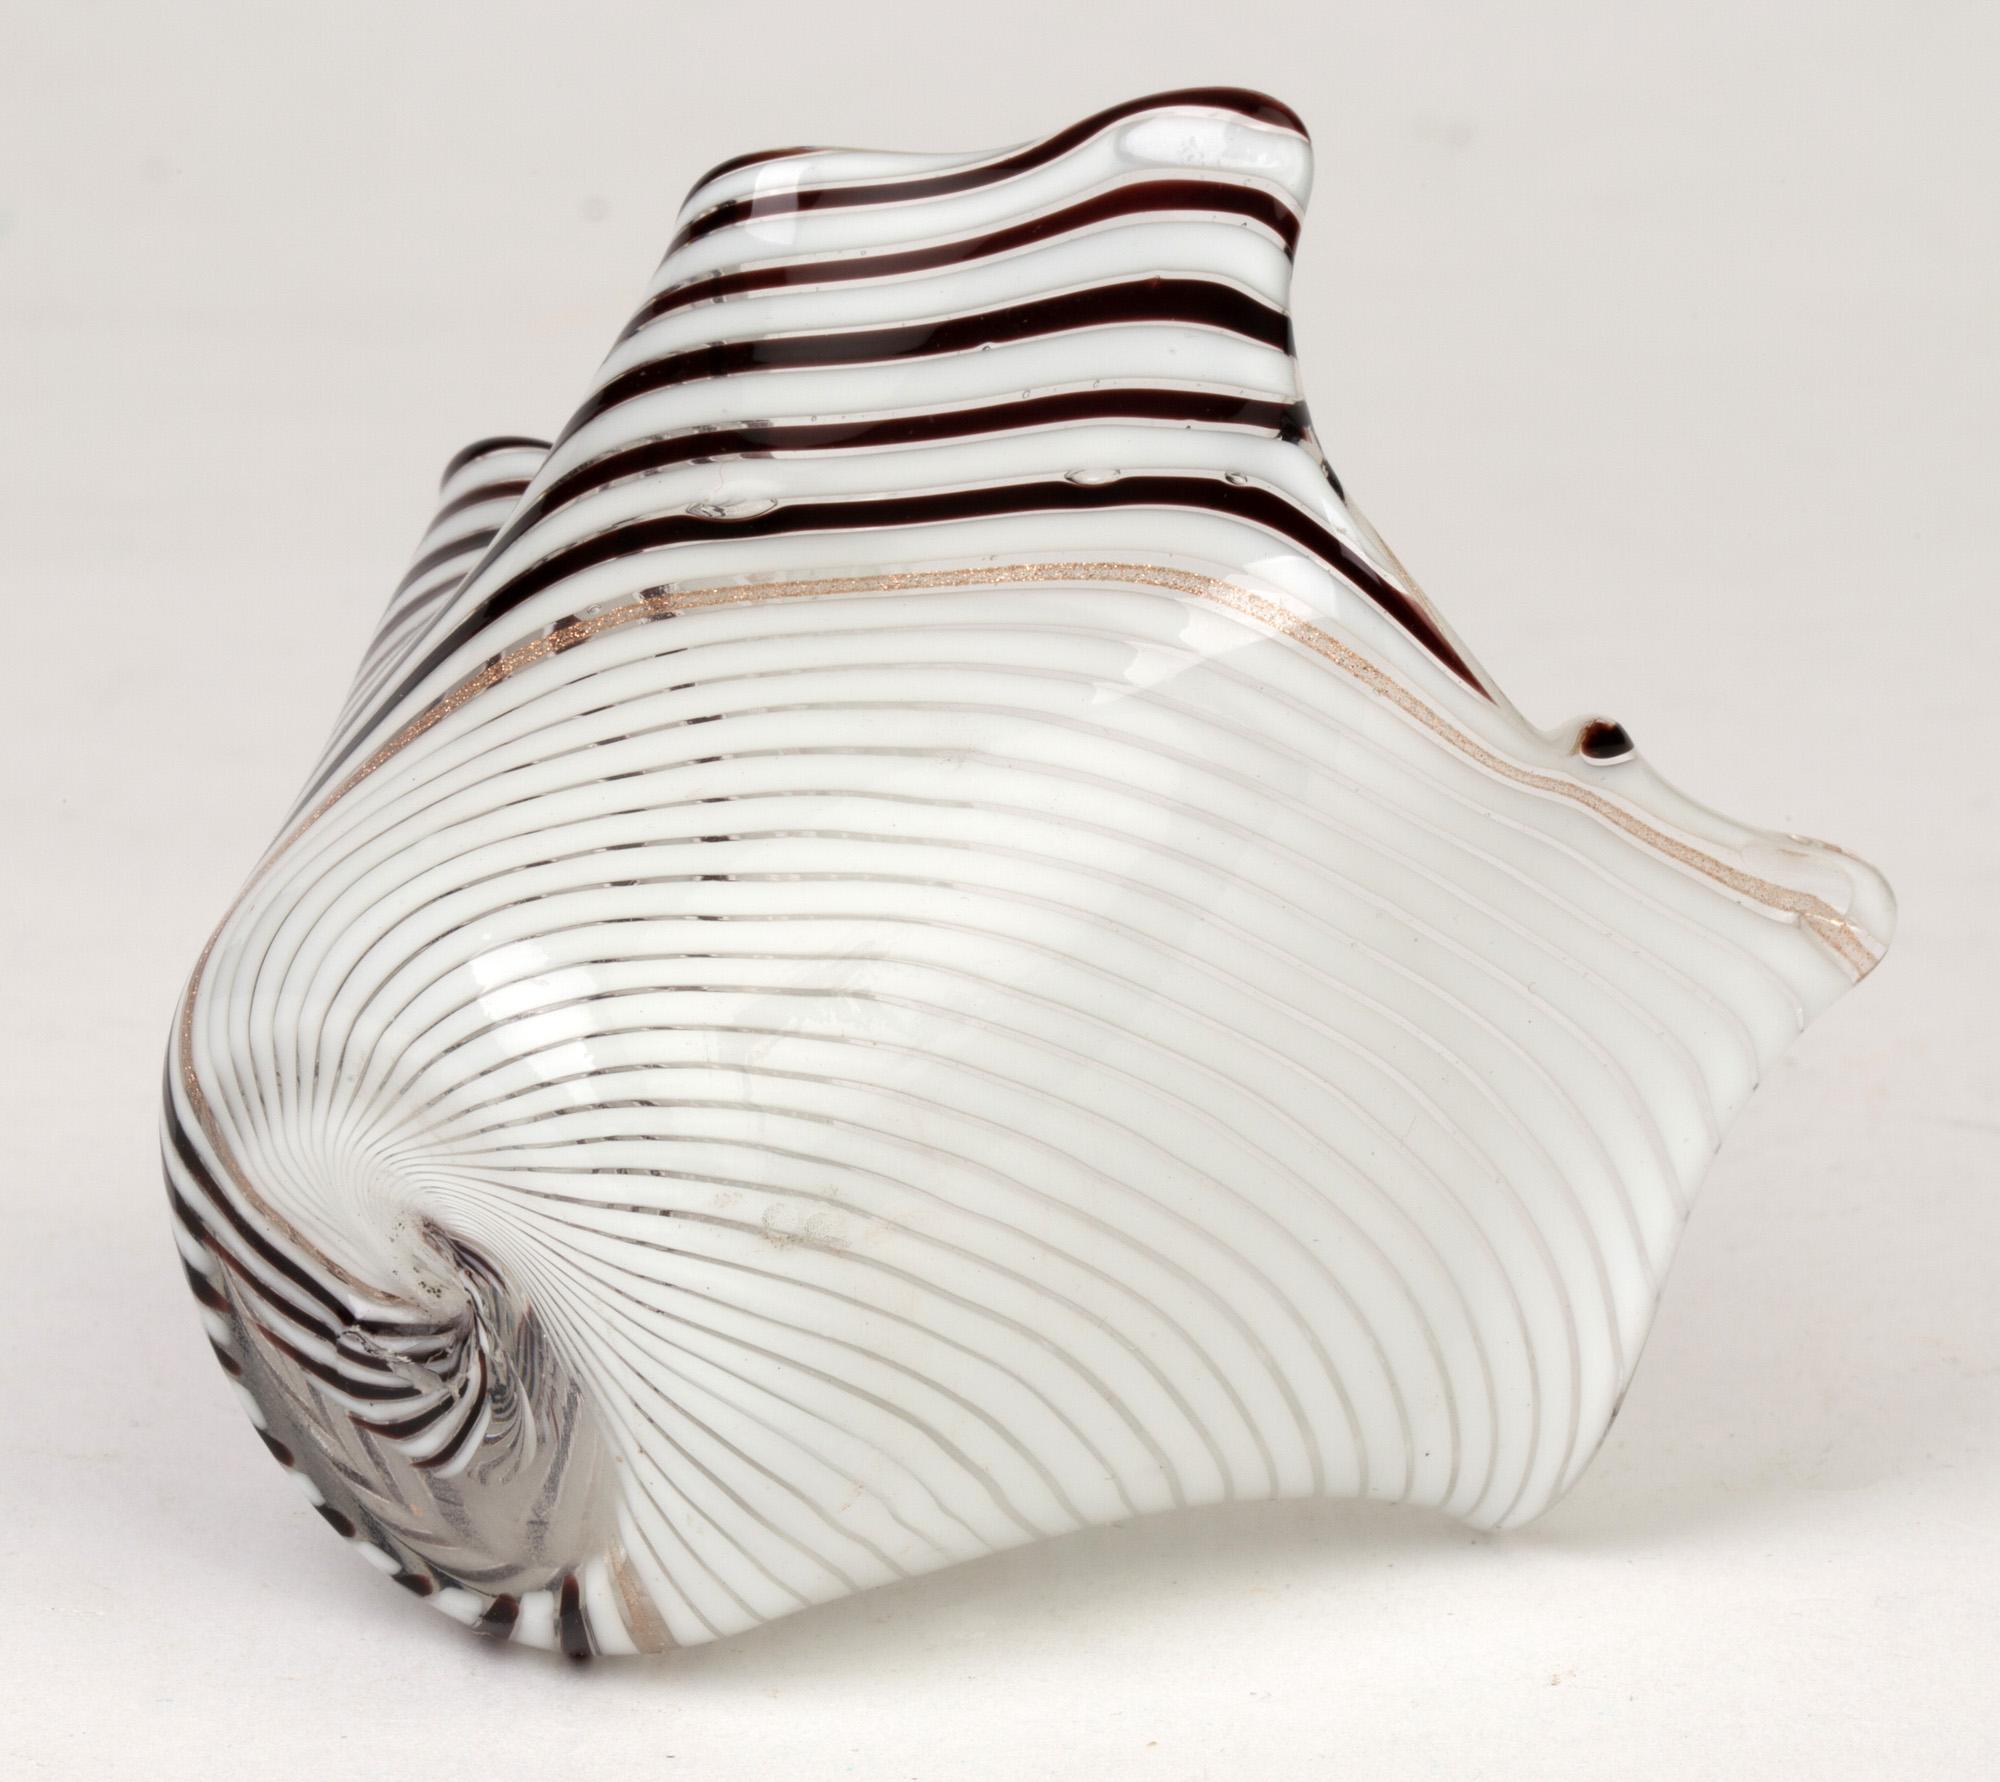 A stunning miniature midcentury Italian Murano art glass fazzoletto (handkerchief) vase designed by Dino Martens for Aureliano Toso, circa 1954. The vase is made in the Fasce Bianco Nero design combining white and black ribbons with a gold